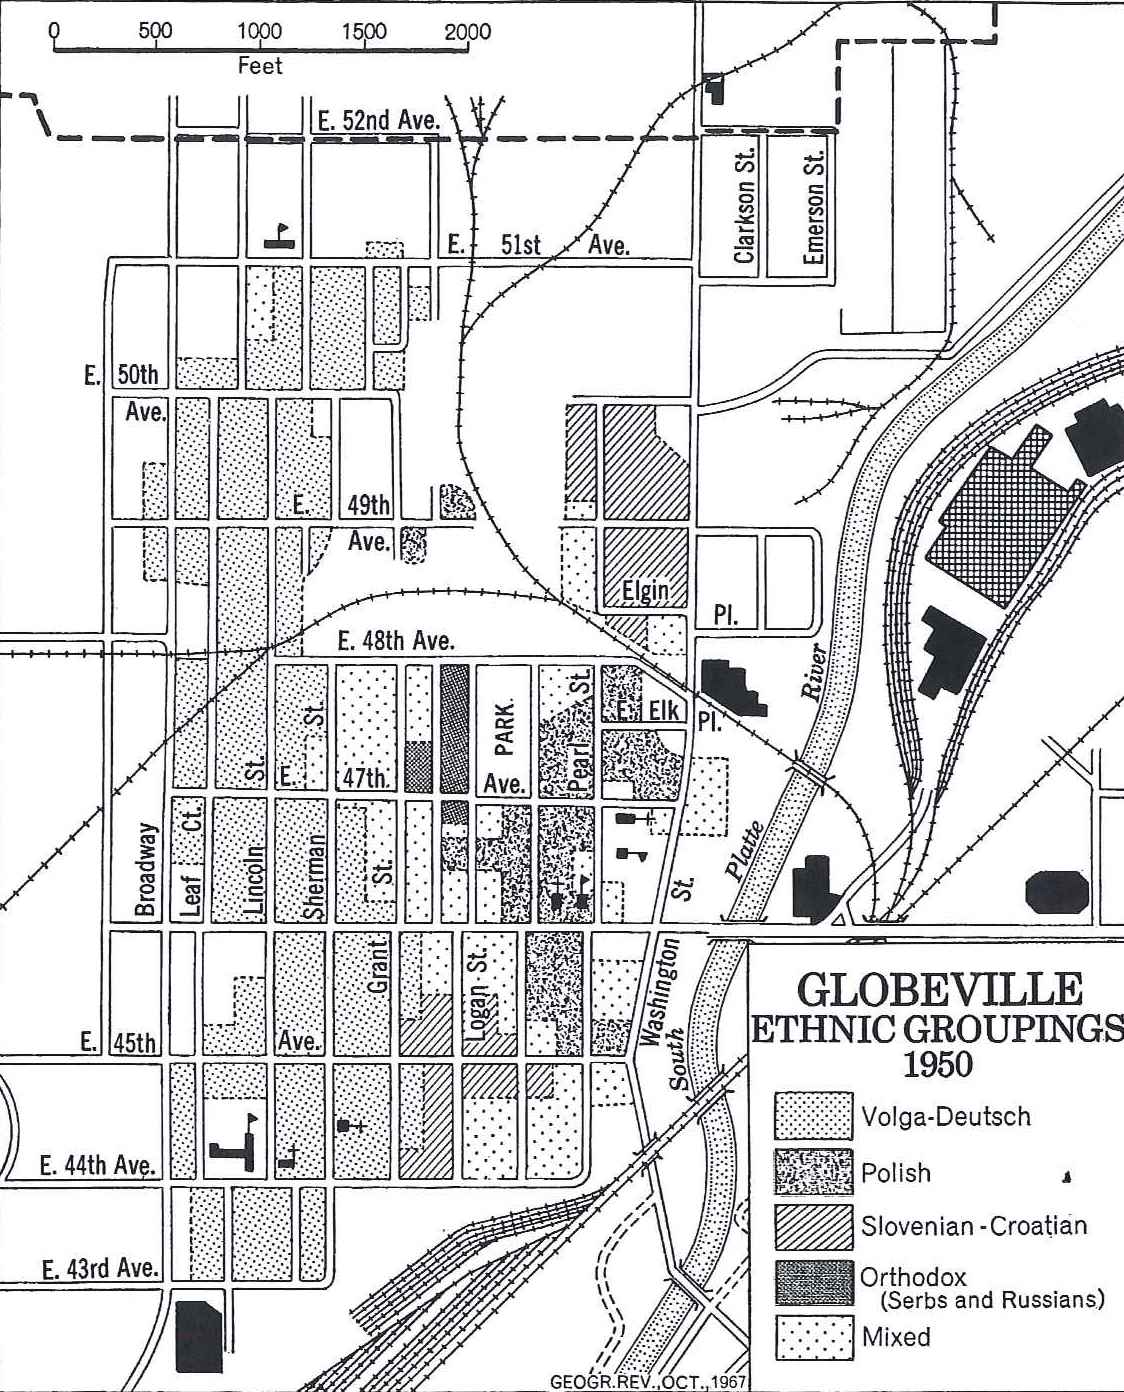 Ethnic Groupings, 1950 Globeville Neighborhood (Denver). Source: Geographical Review, 1967.